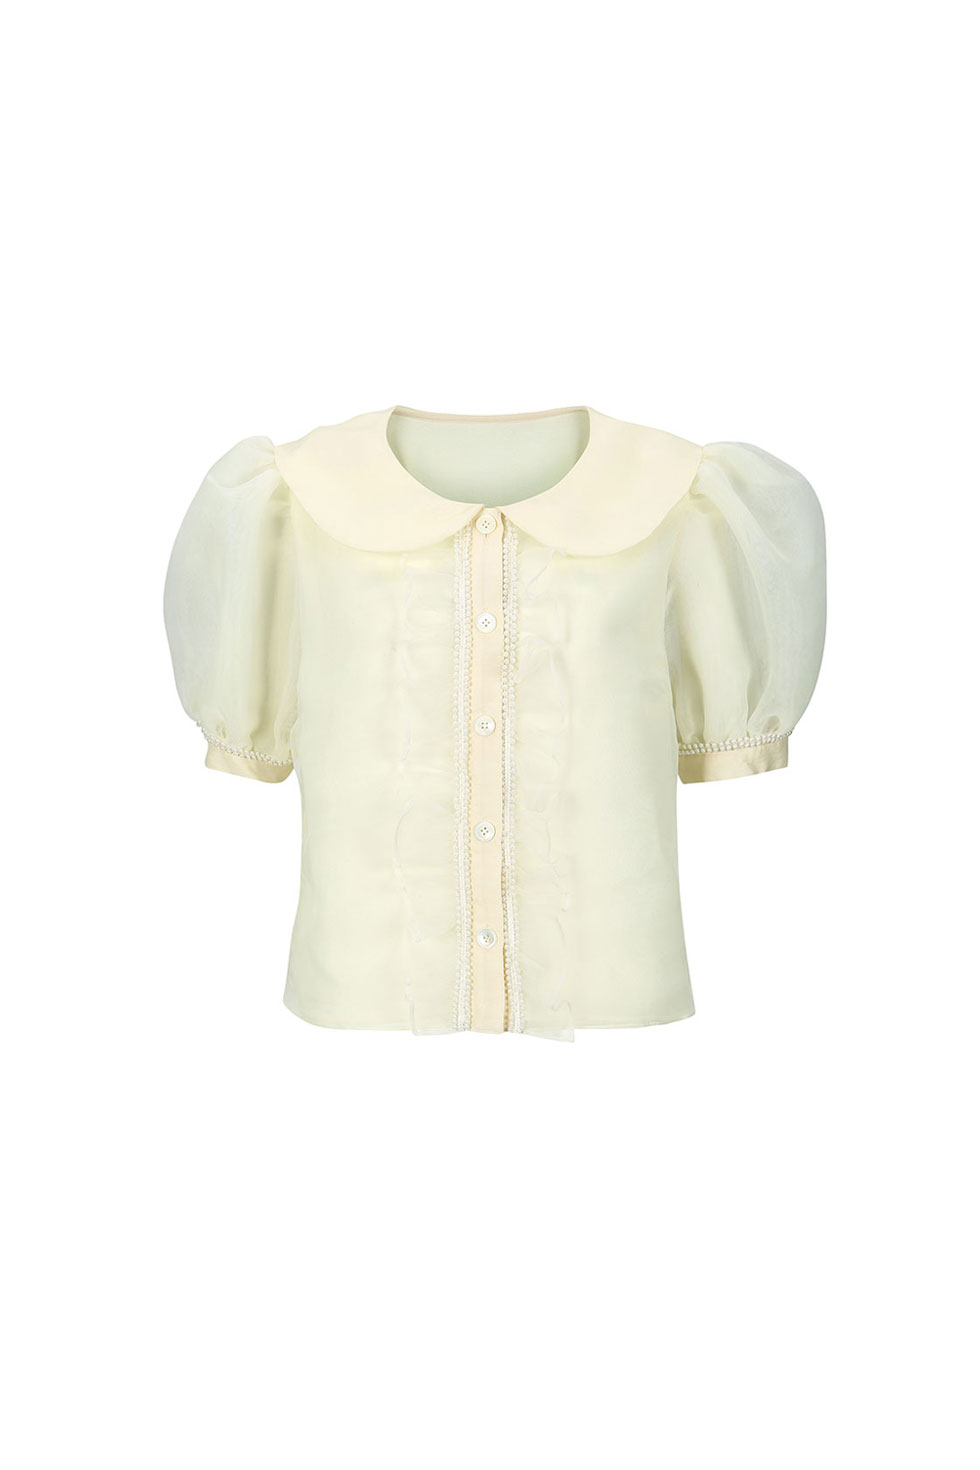 PEARL FRILL BLOUSE - YELLOW